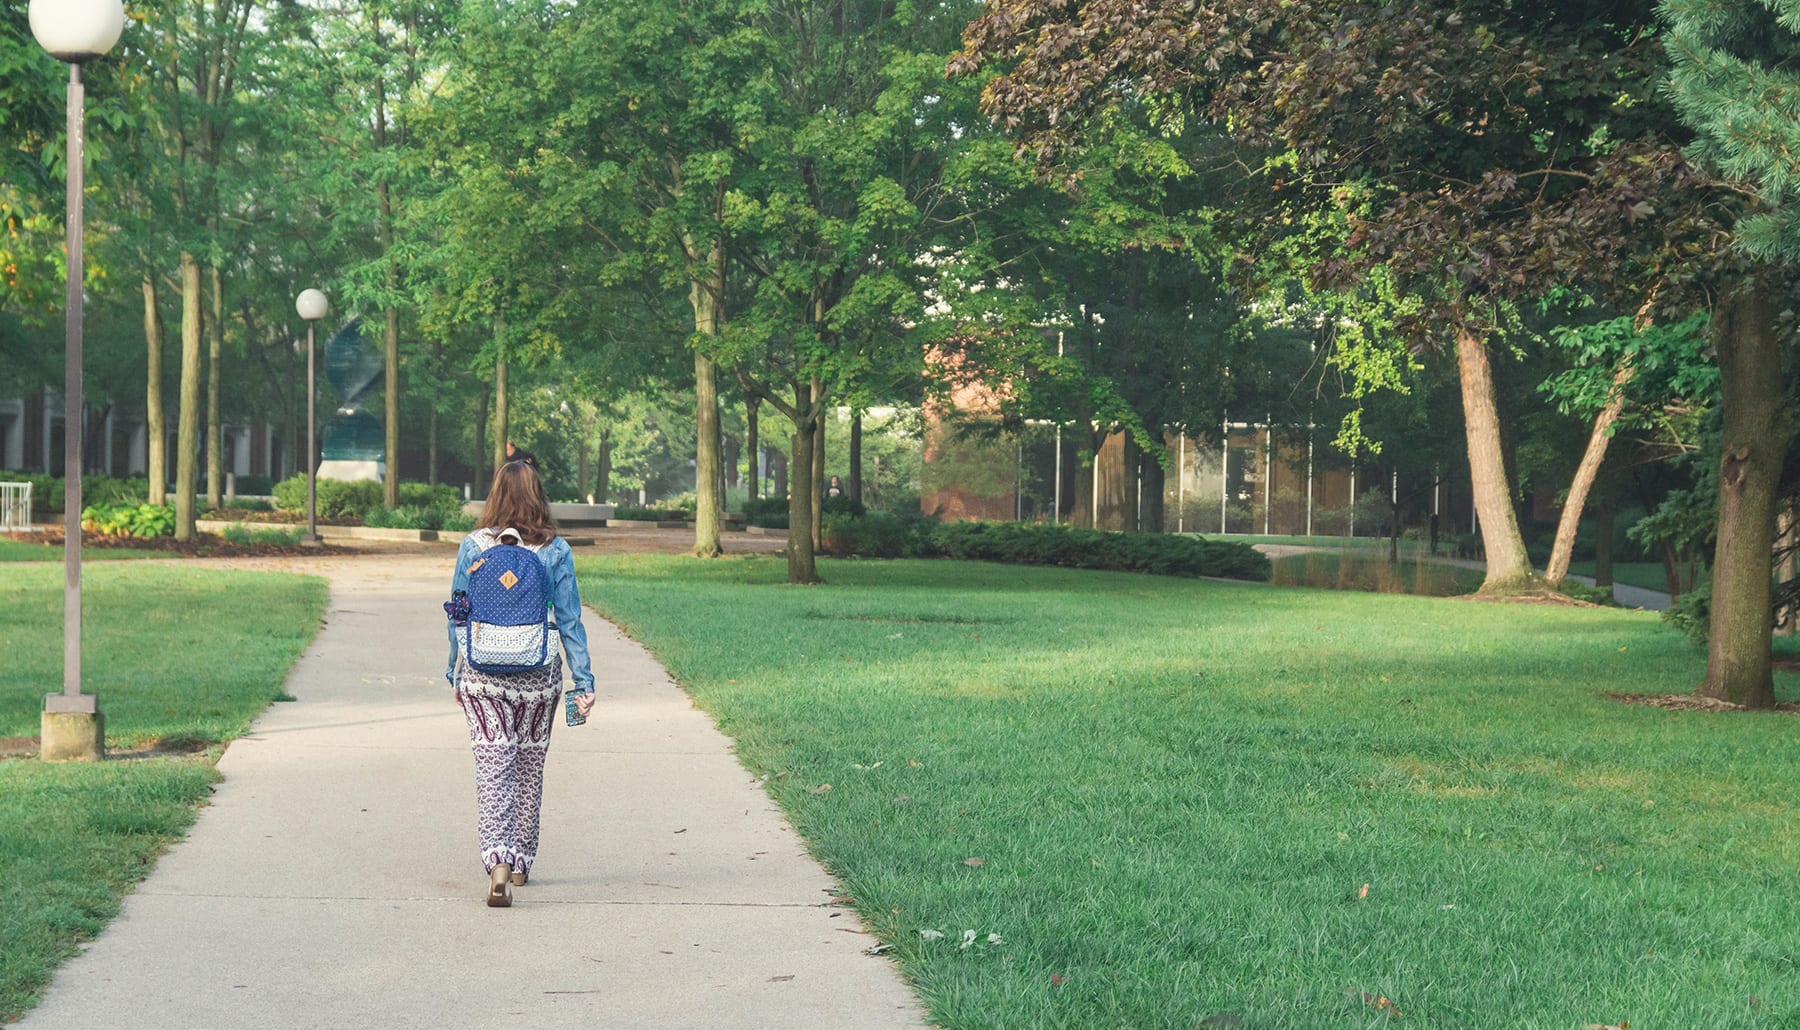 Female student walking the sidewalk among green grass and trees.